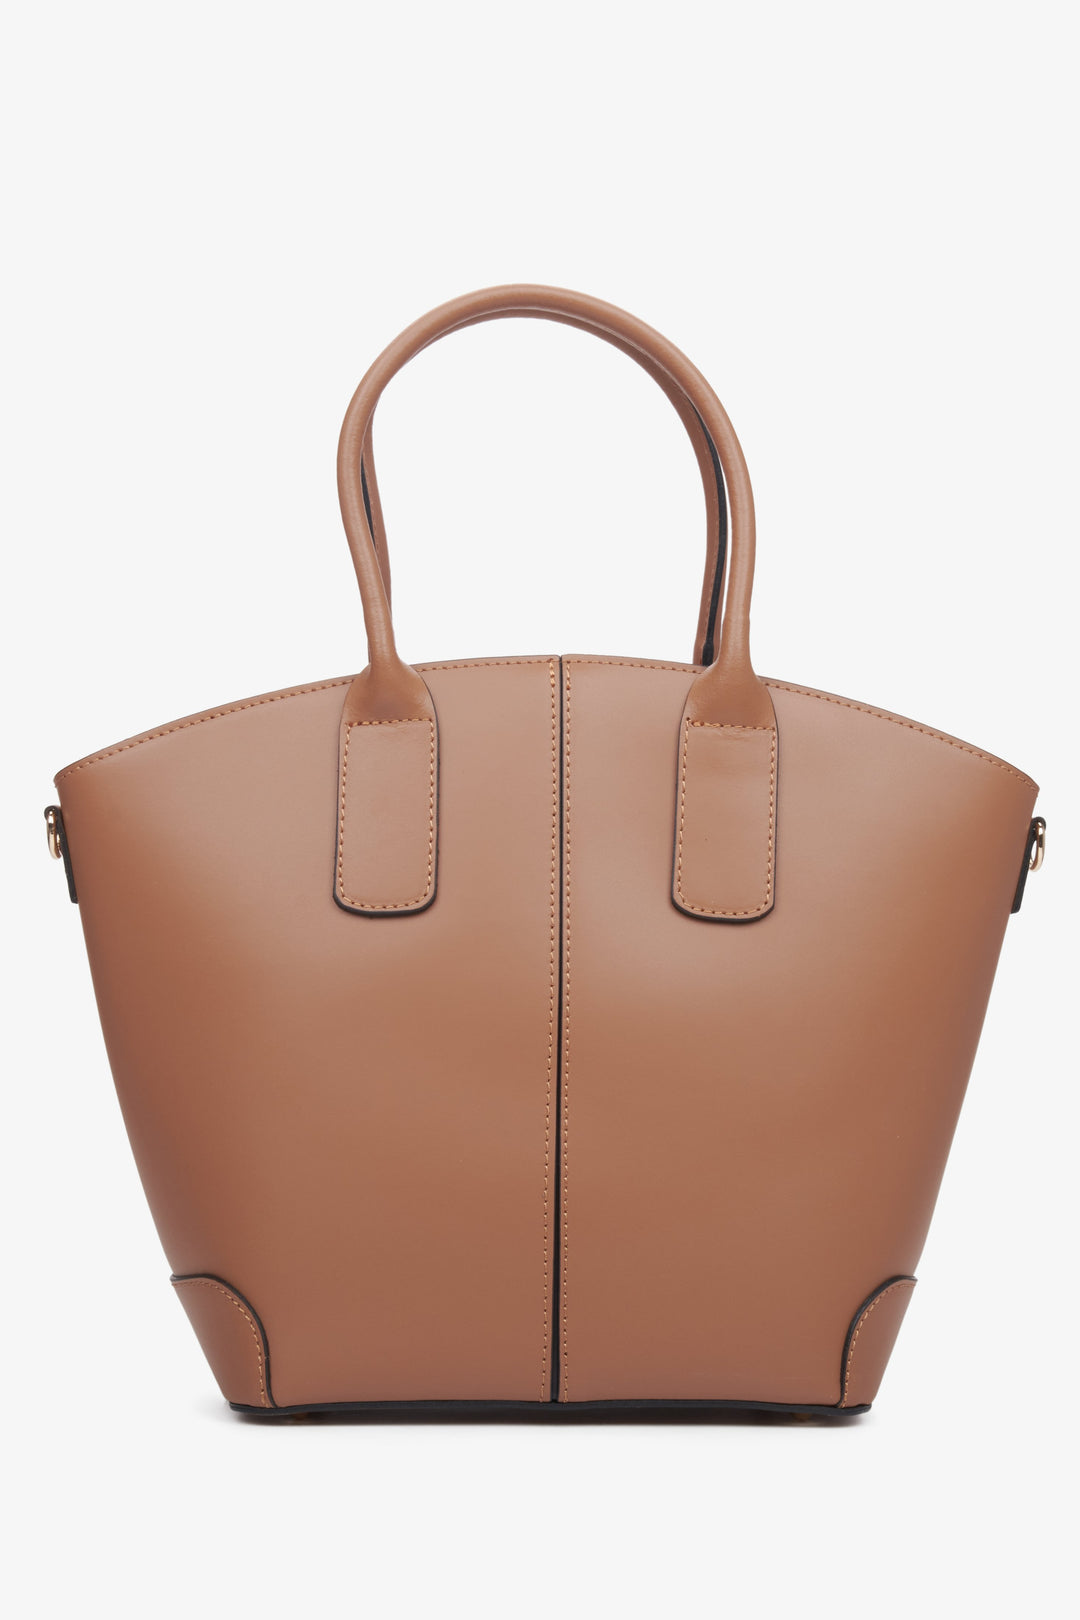 Women's brown shopper bag made of Italian genuine leather by  Estro.